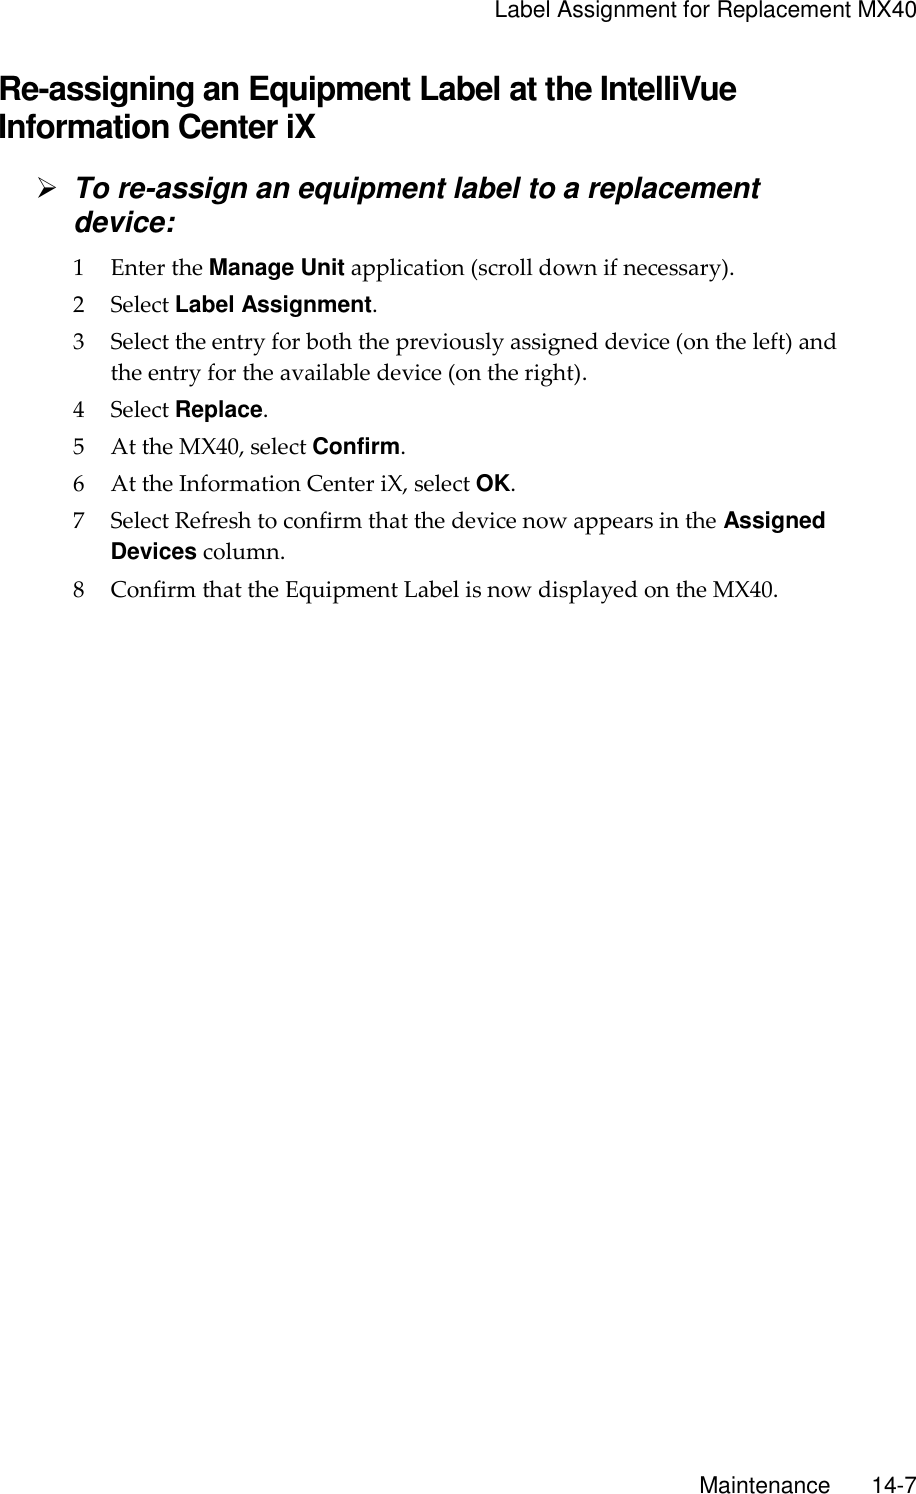     Label Assignment for Replacement MX40       Maintenance       14-7 Re-assigning an Equipment Label at the IntelliVue Information Center iX  To re-assign an equipment label to a replacement device: 1 Enter the Manage Unit application (scroll down if necessary). 2 Select Label Assignment. 3 Select the entry for both the previously assigned device (on the left) and the entry for the available device (on the right). 4 Select Replace. 5 At the MX40, select Confirm. 6 At the Information Center iX, select OK. 7 Select Refresh to confirm that the device now appears in the Assigned Devices column. 8 Confirm that the Equipment Label is now displayed on the MX40.  